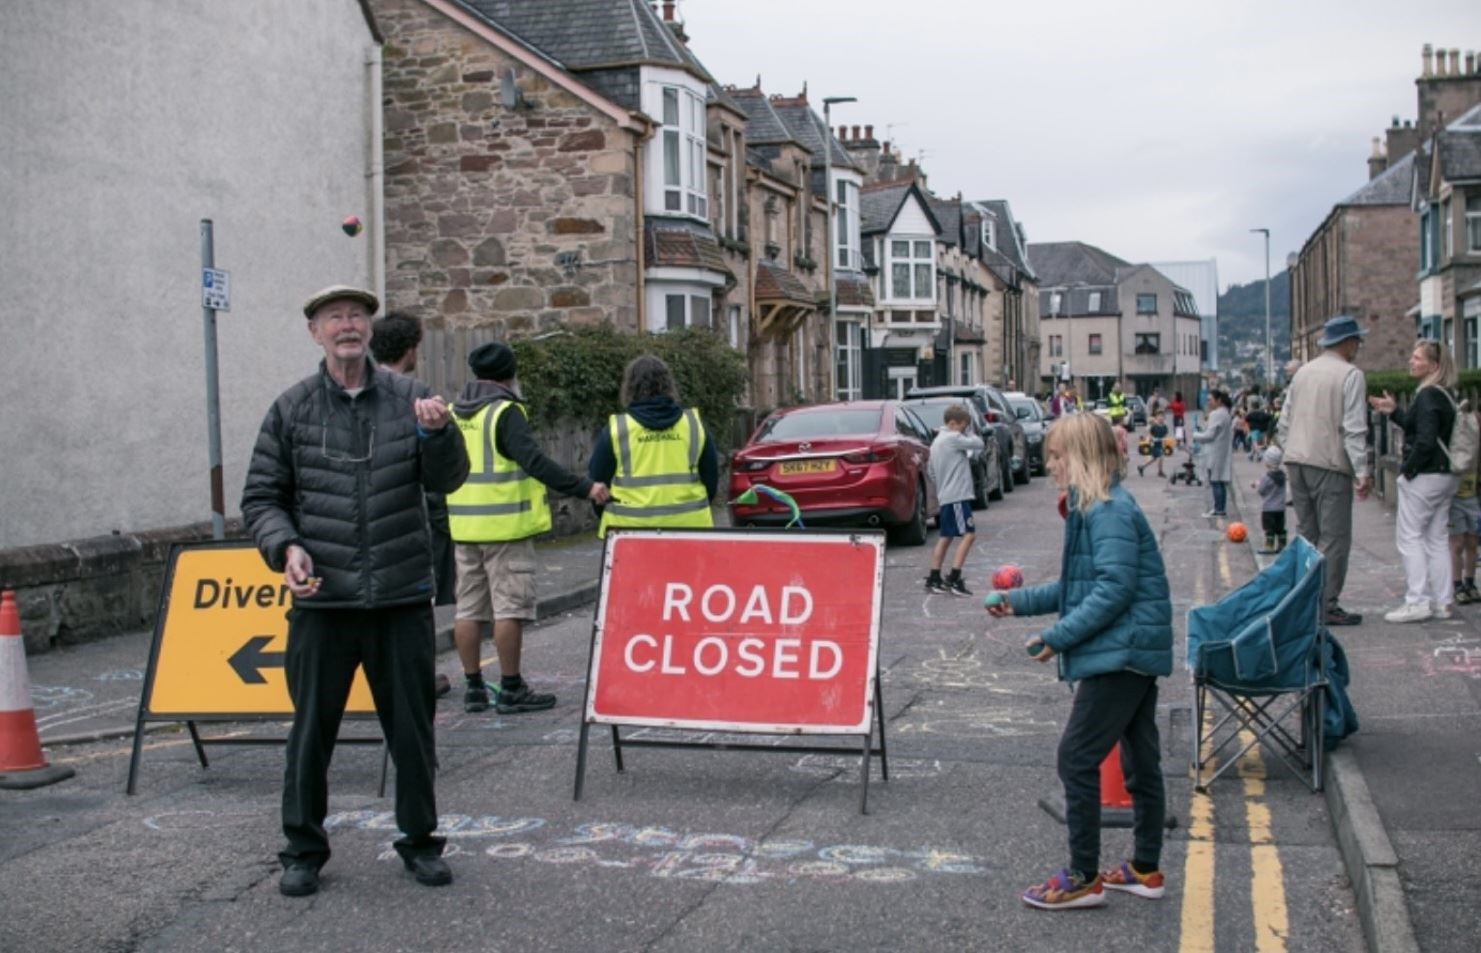 Charles Street in Inverness was closed for two hours to allow the trial to take place. Photo: Katie Nonle